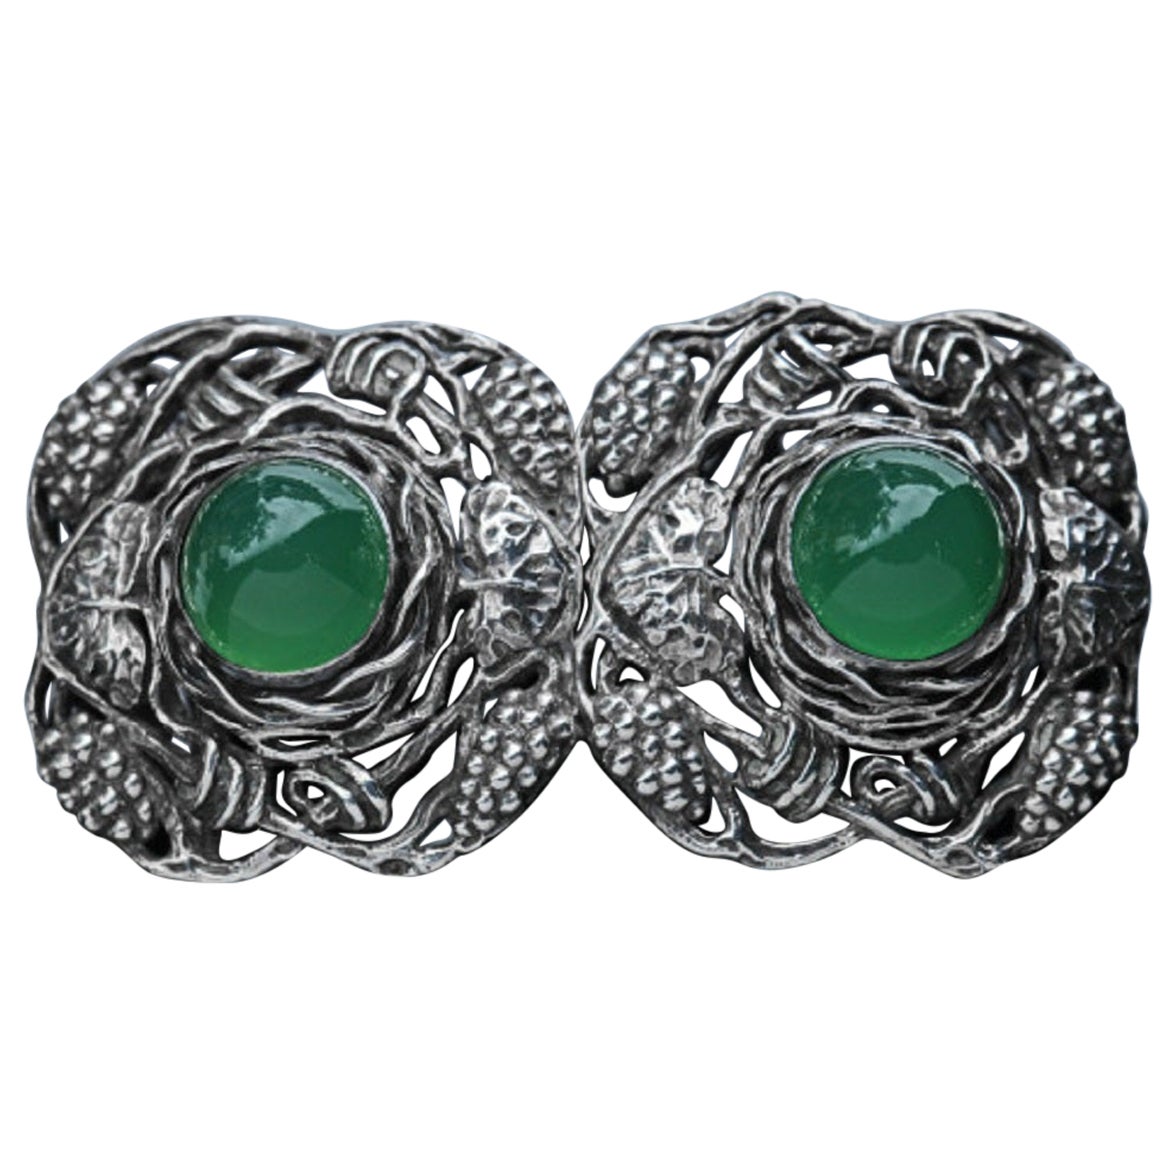 Arts and Crafts Waist Clasp by Joseph Anton Hodel, Silver & Chalcedony C. 1905